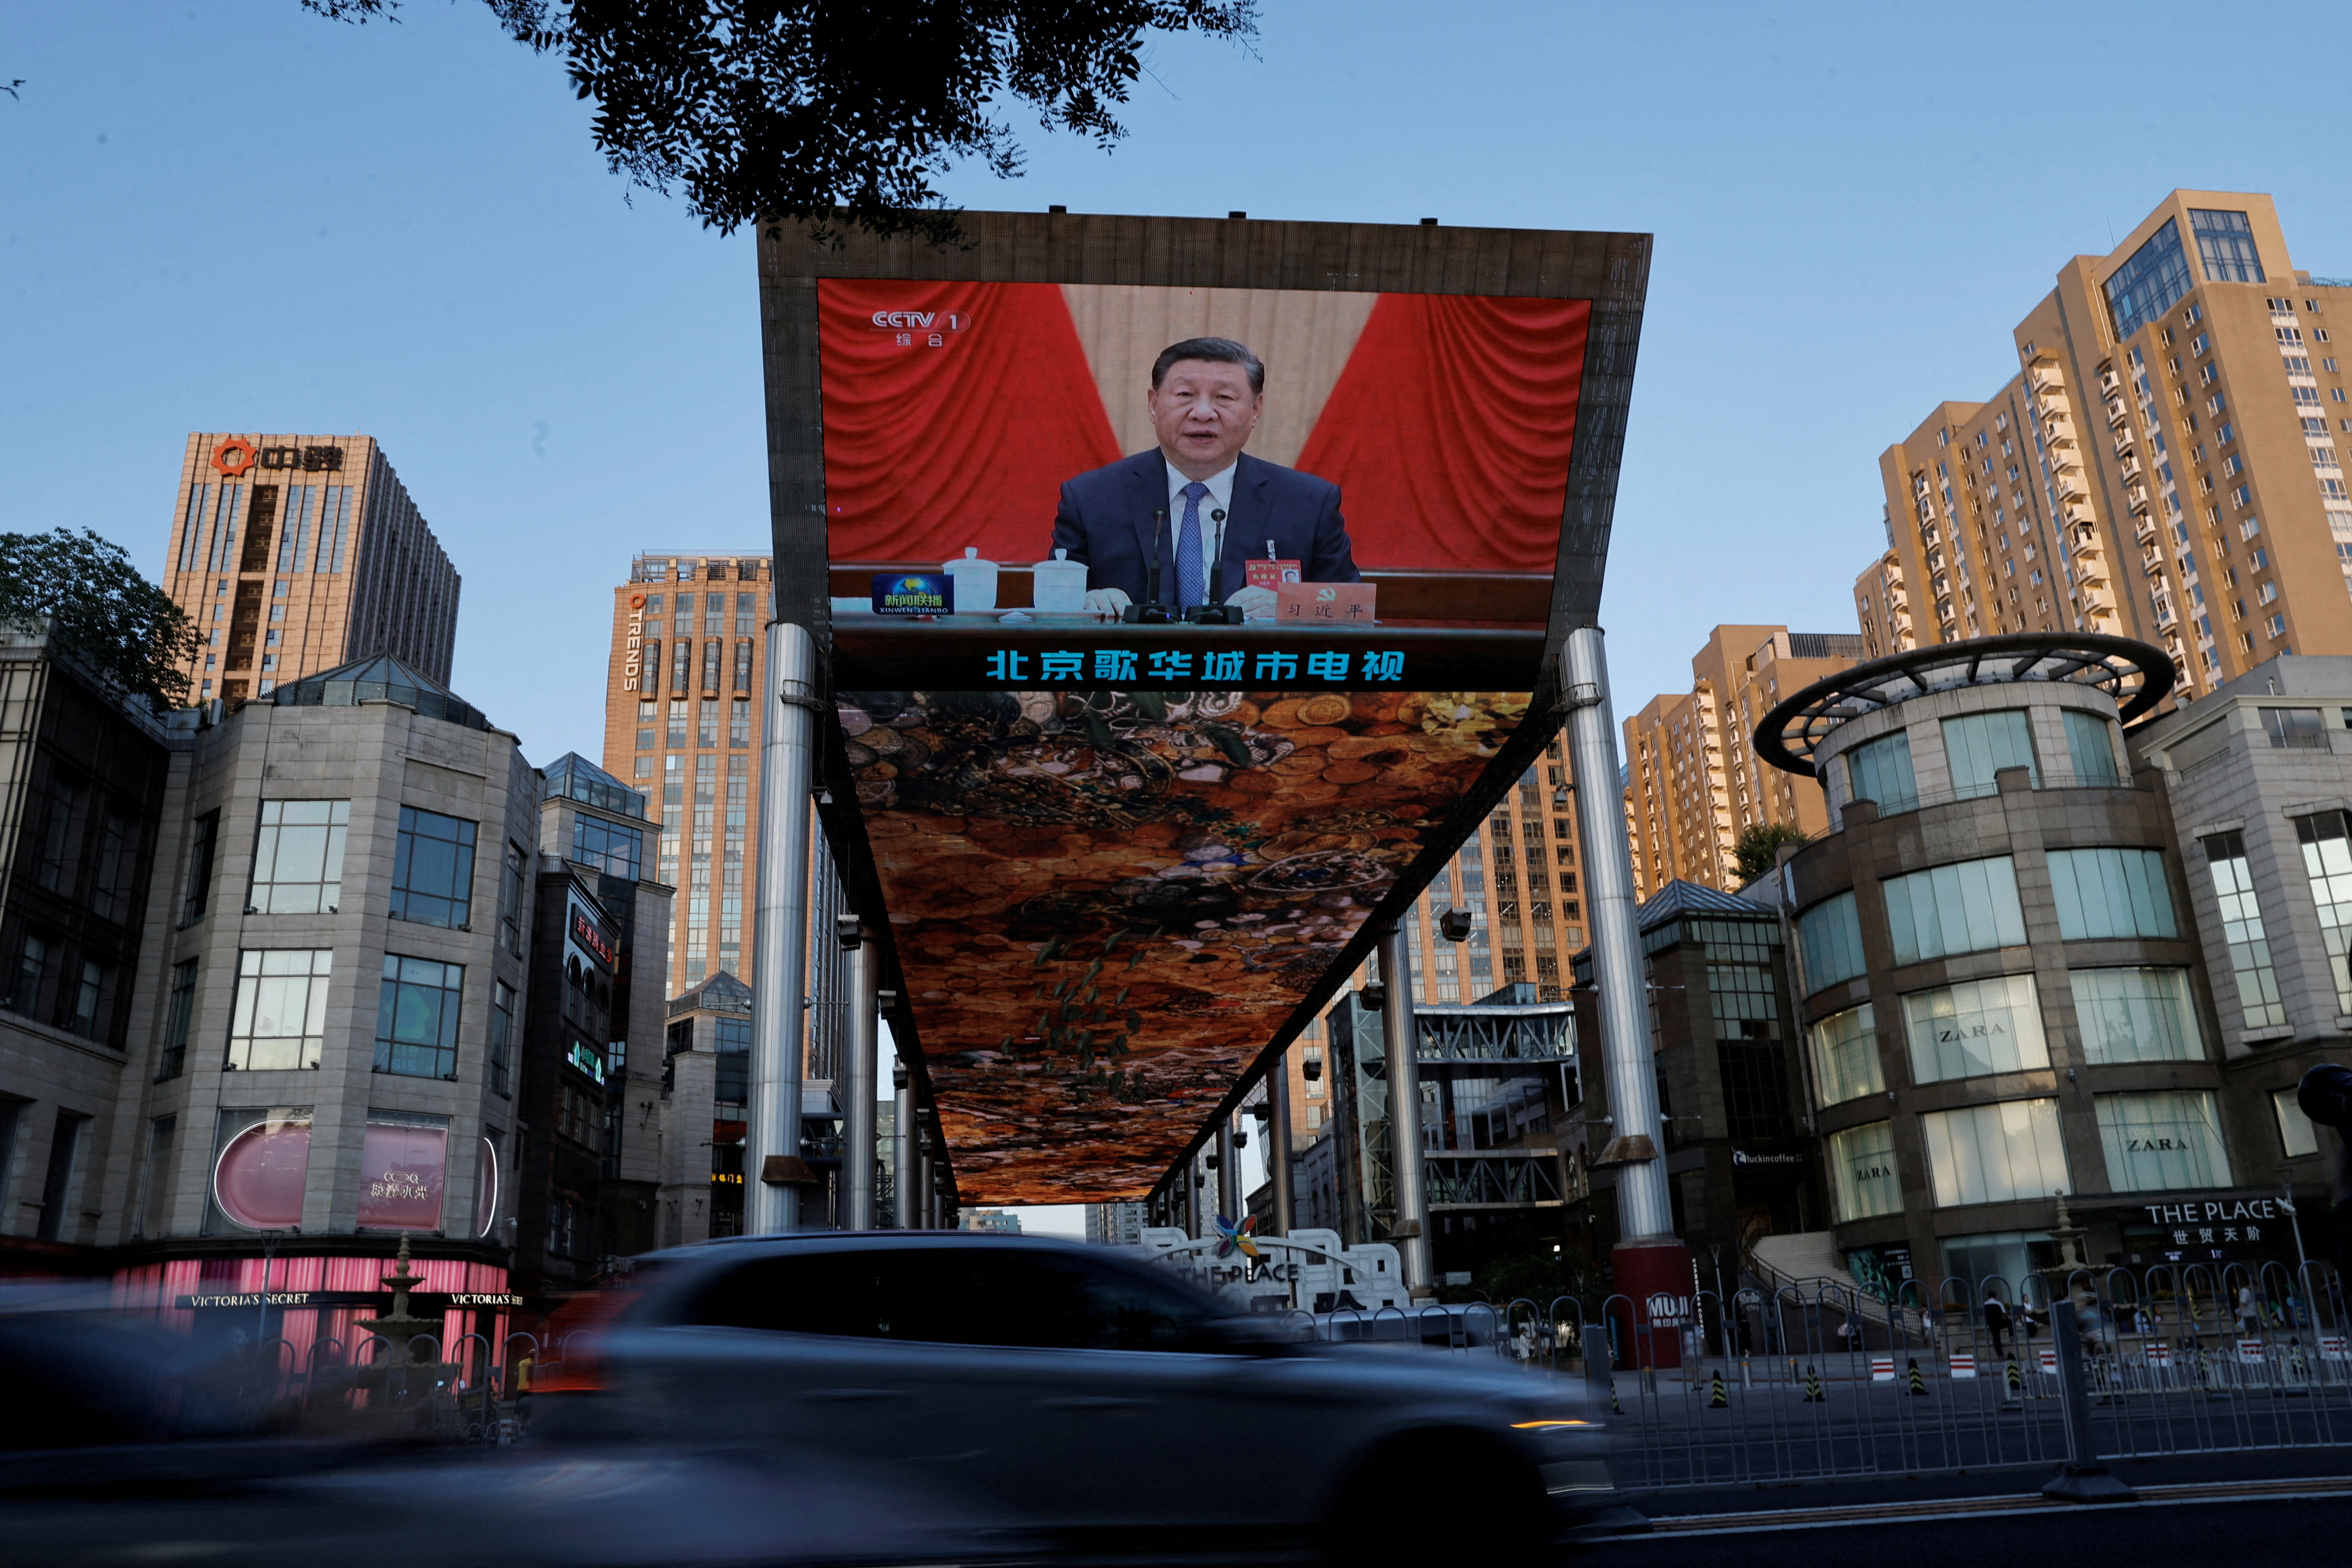 Giant screen shows news footage of the third plenary session of the 20th Central Committee of the Communist Party of China (CPC), in Beijing